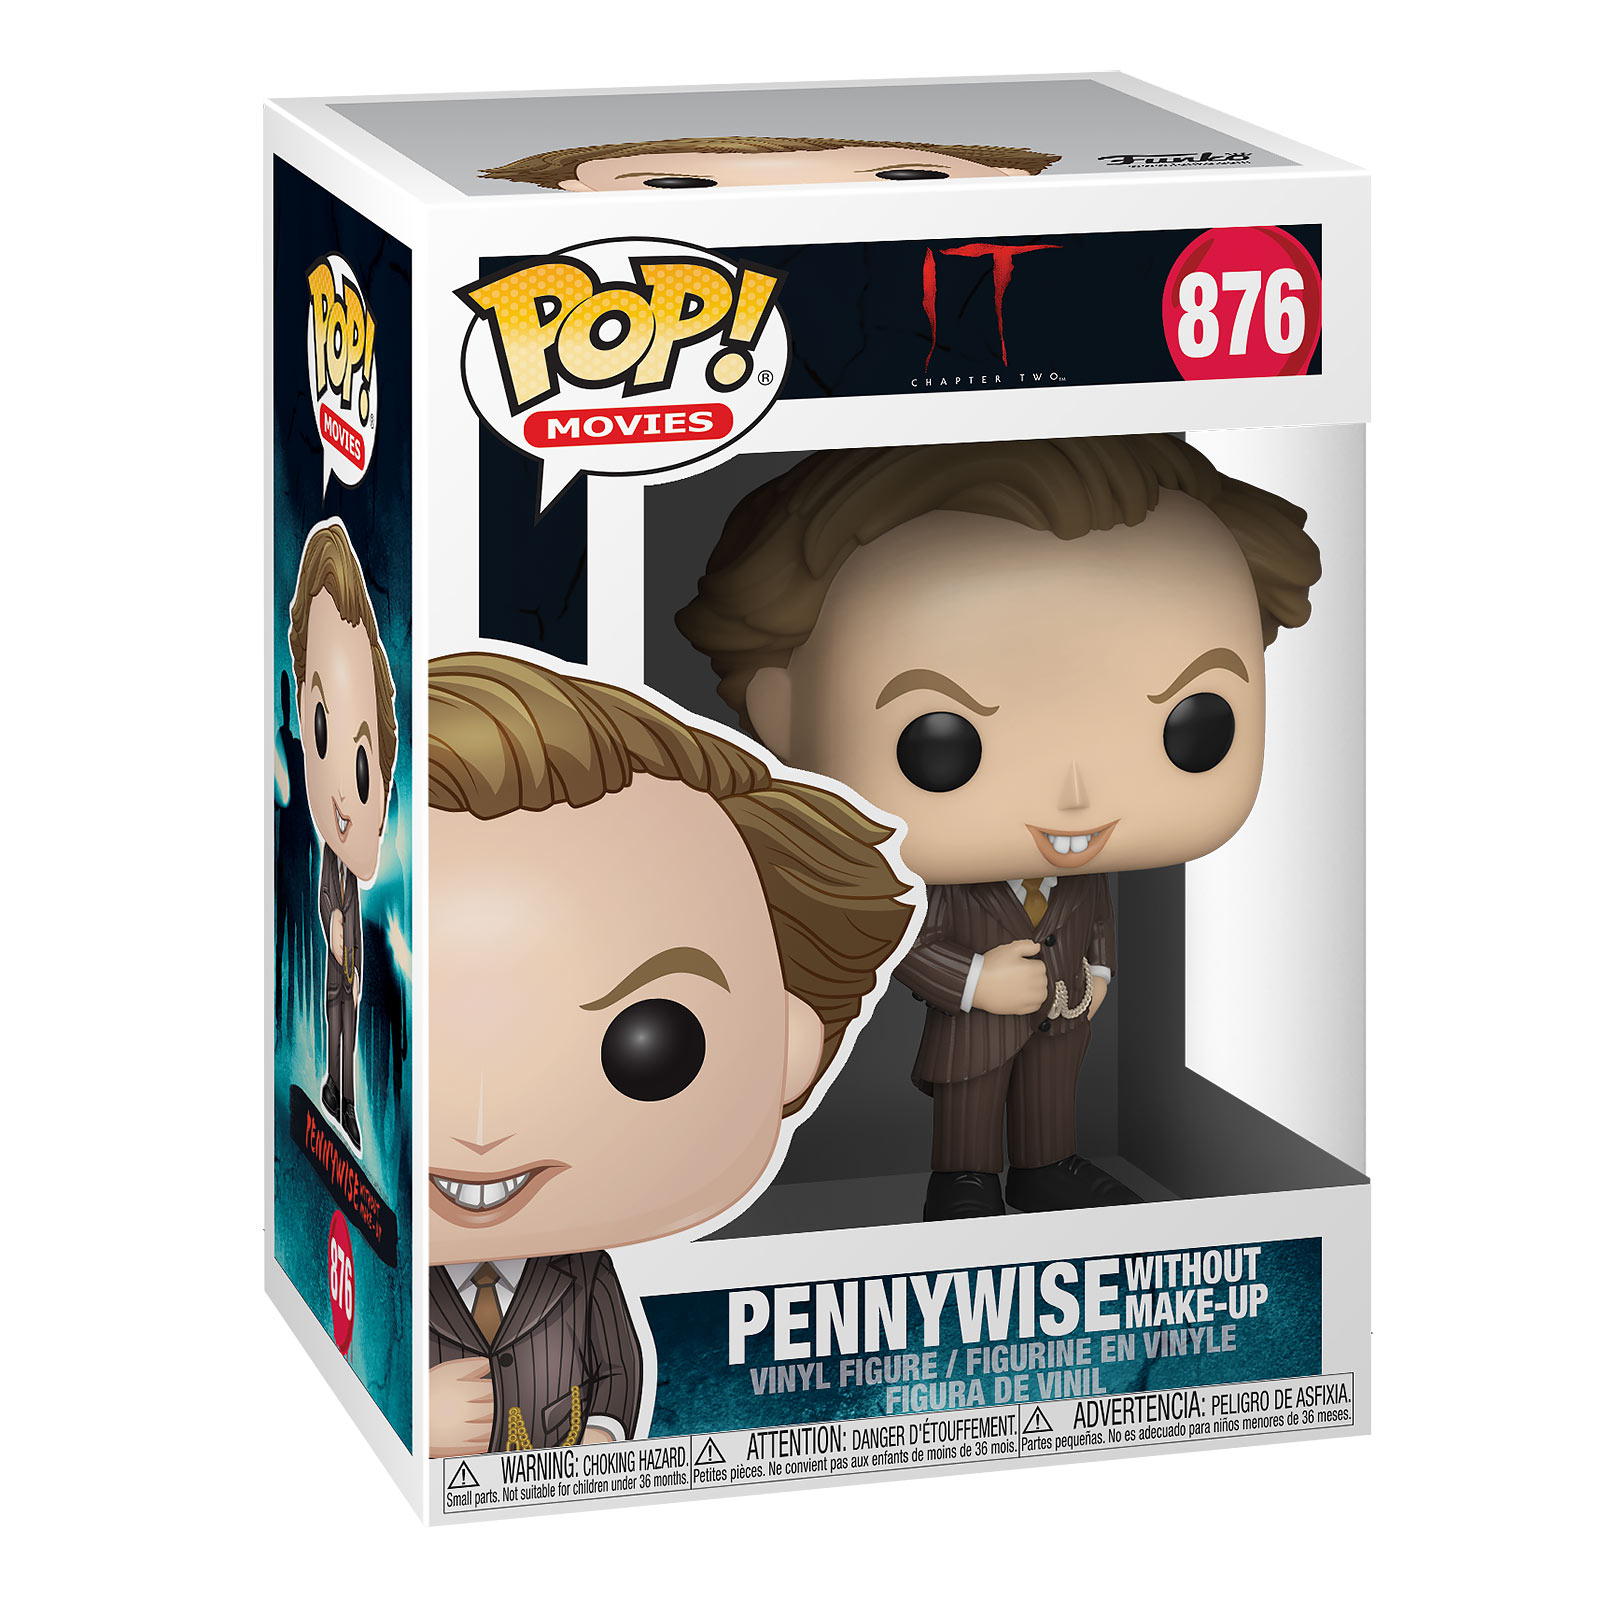 Stephen King's ES - Pennywise without makeup Funko Pop figure